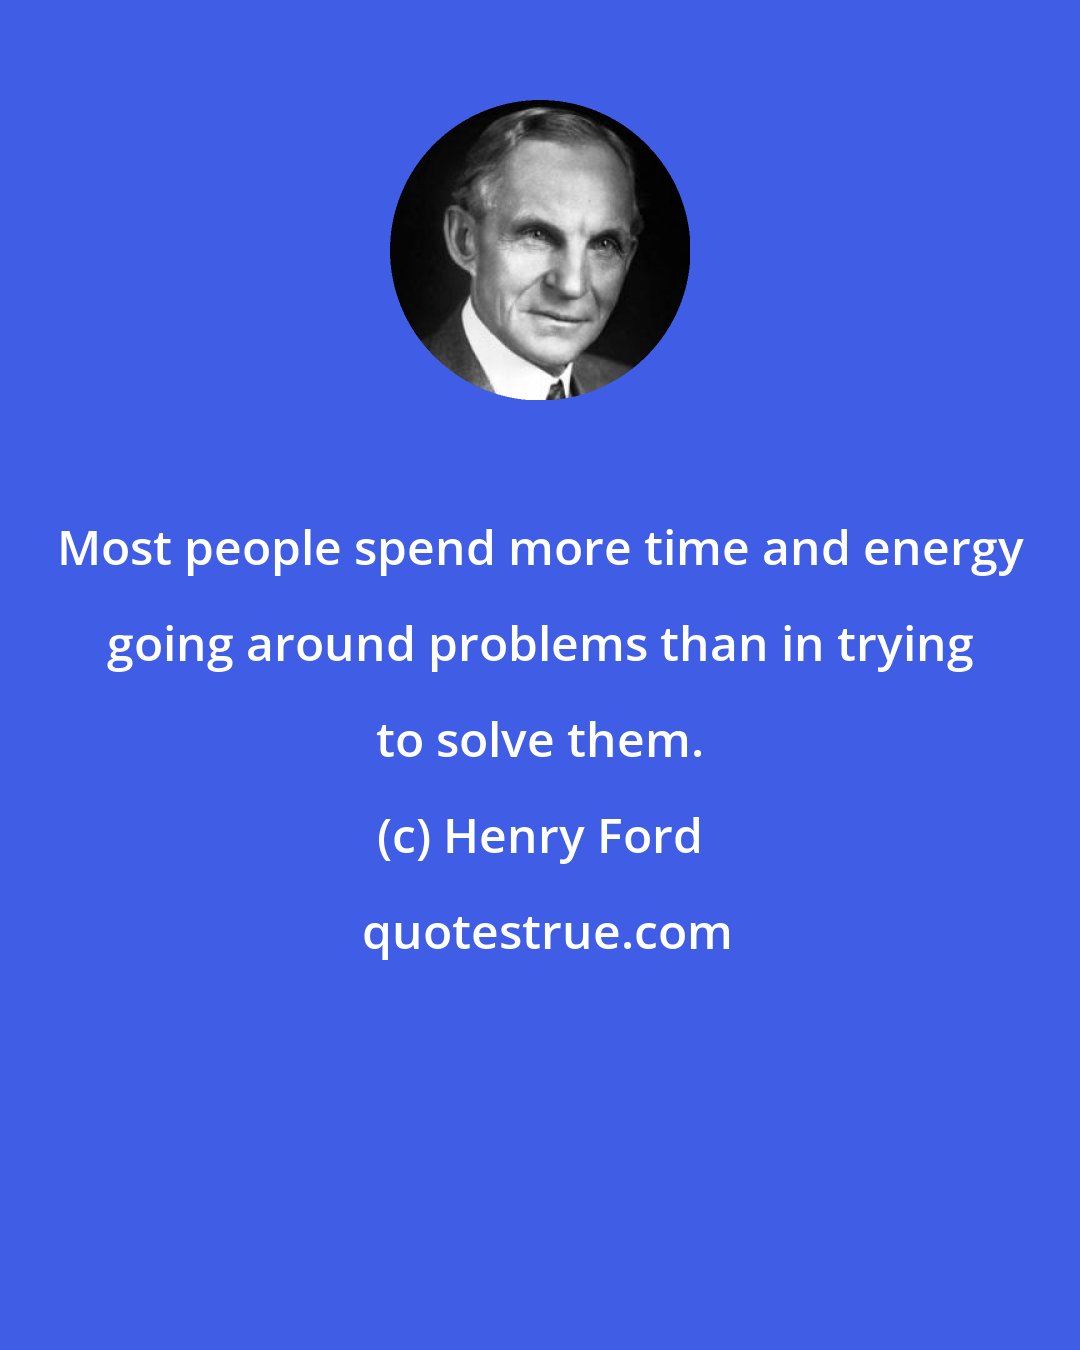 Henry Ford: Most people spend more time and energy going around problems than in trying to solve them.